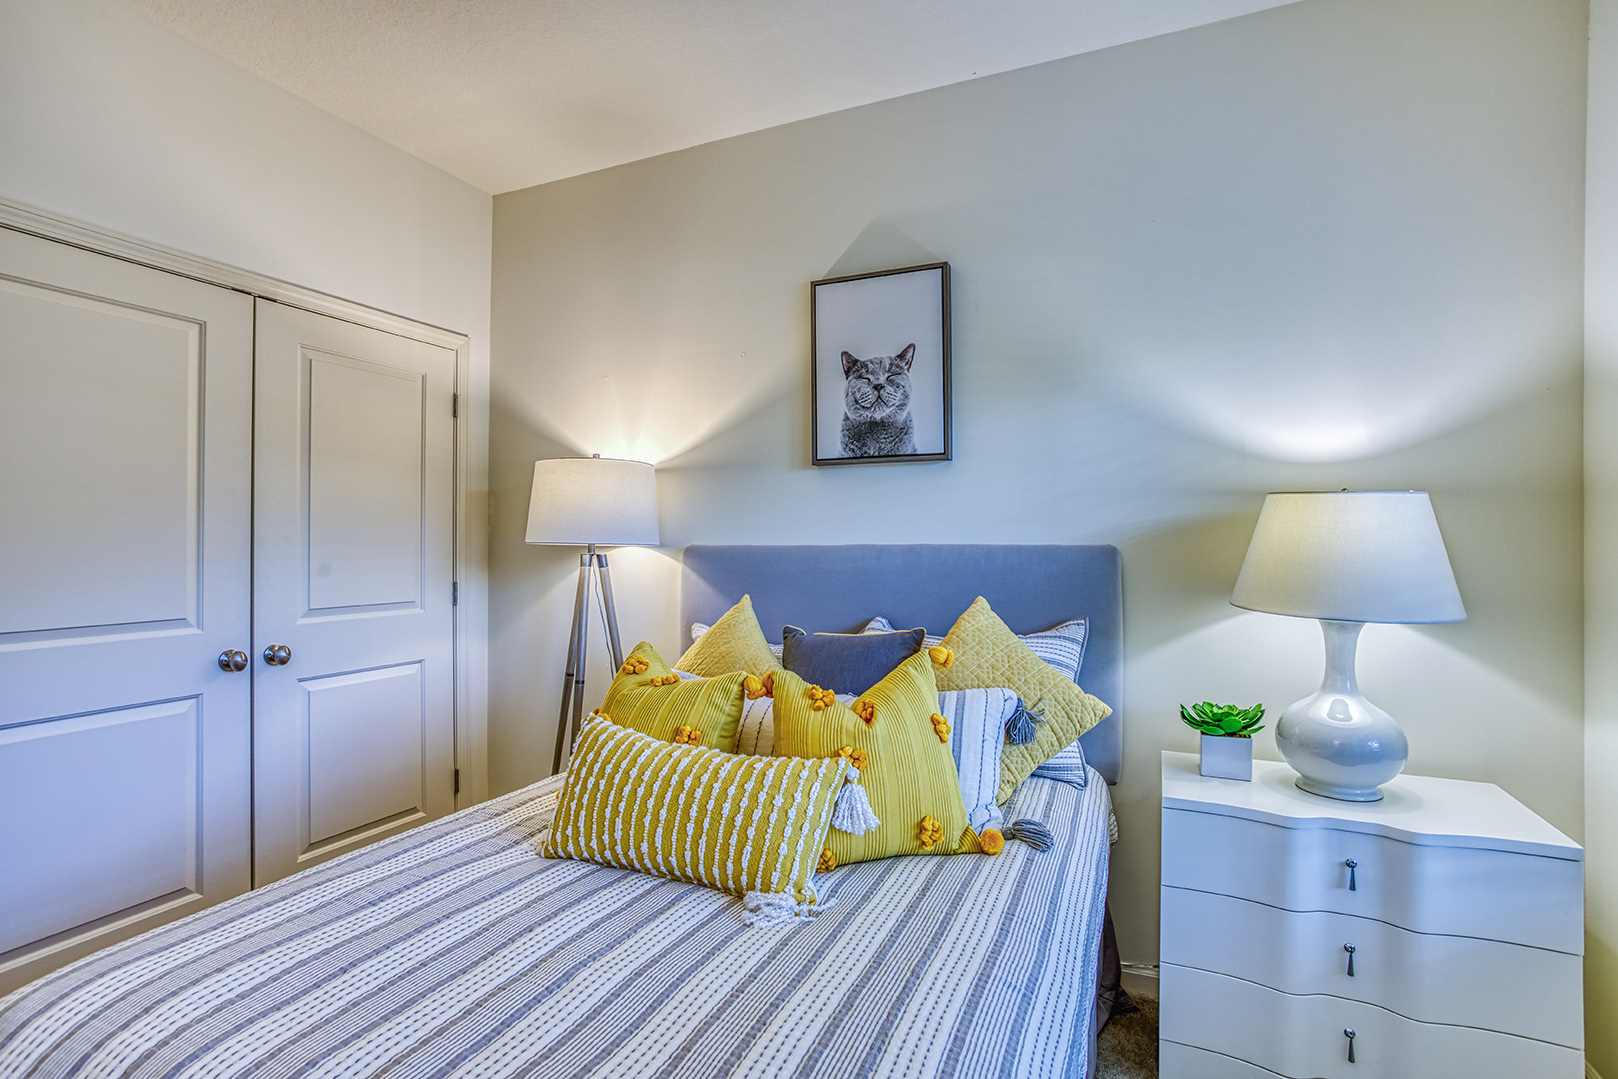 The Links at Pebble Creek Yellow Bedroom